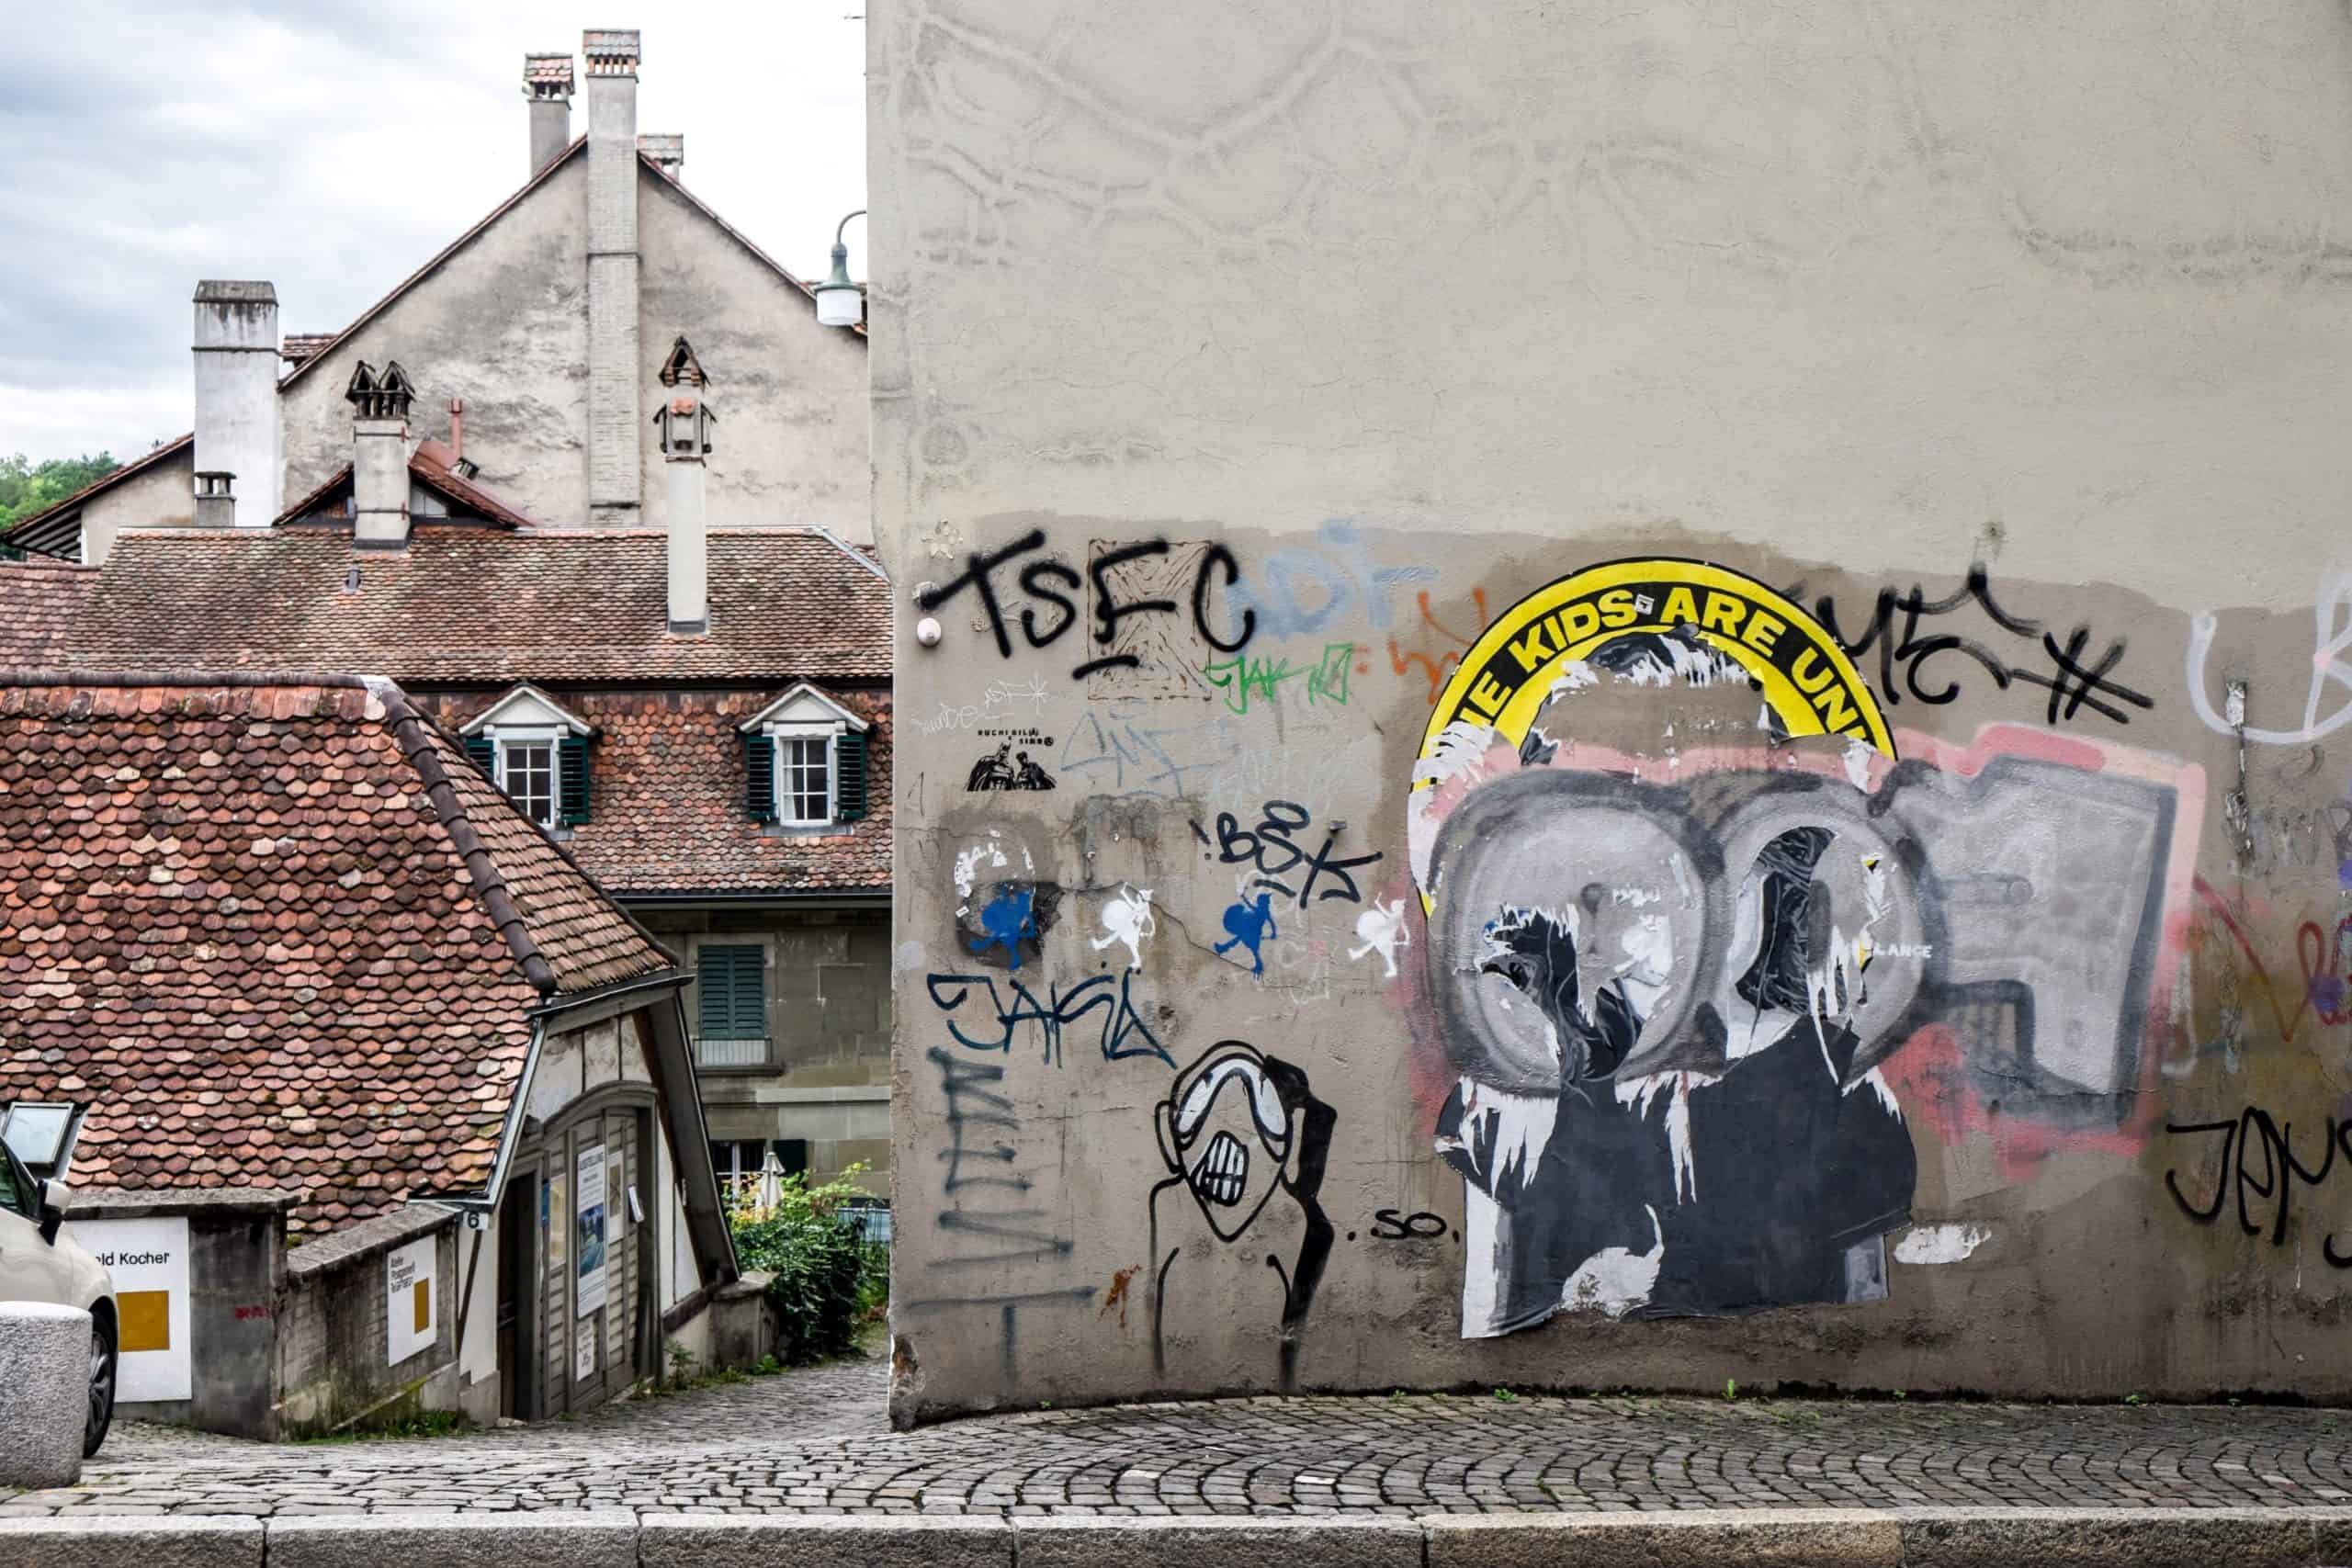 Street art in old Bern city, Switzerland, a modern image next to timeless red-roofed houses